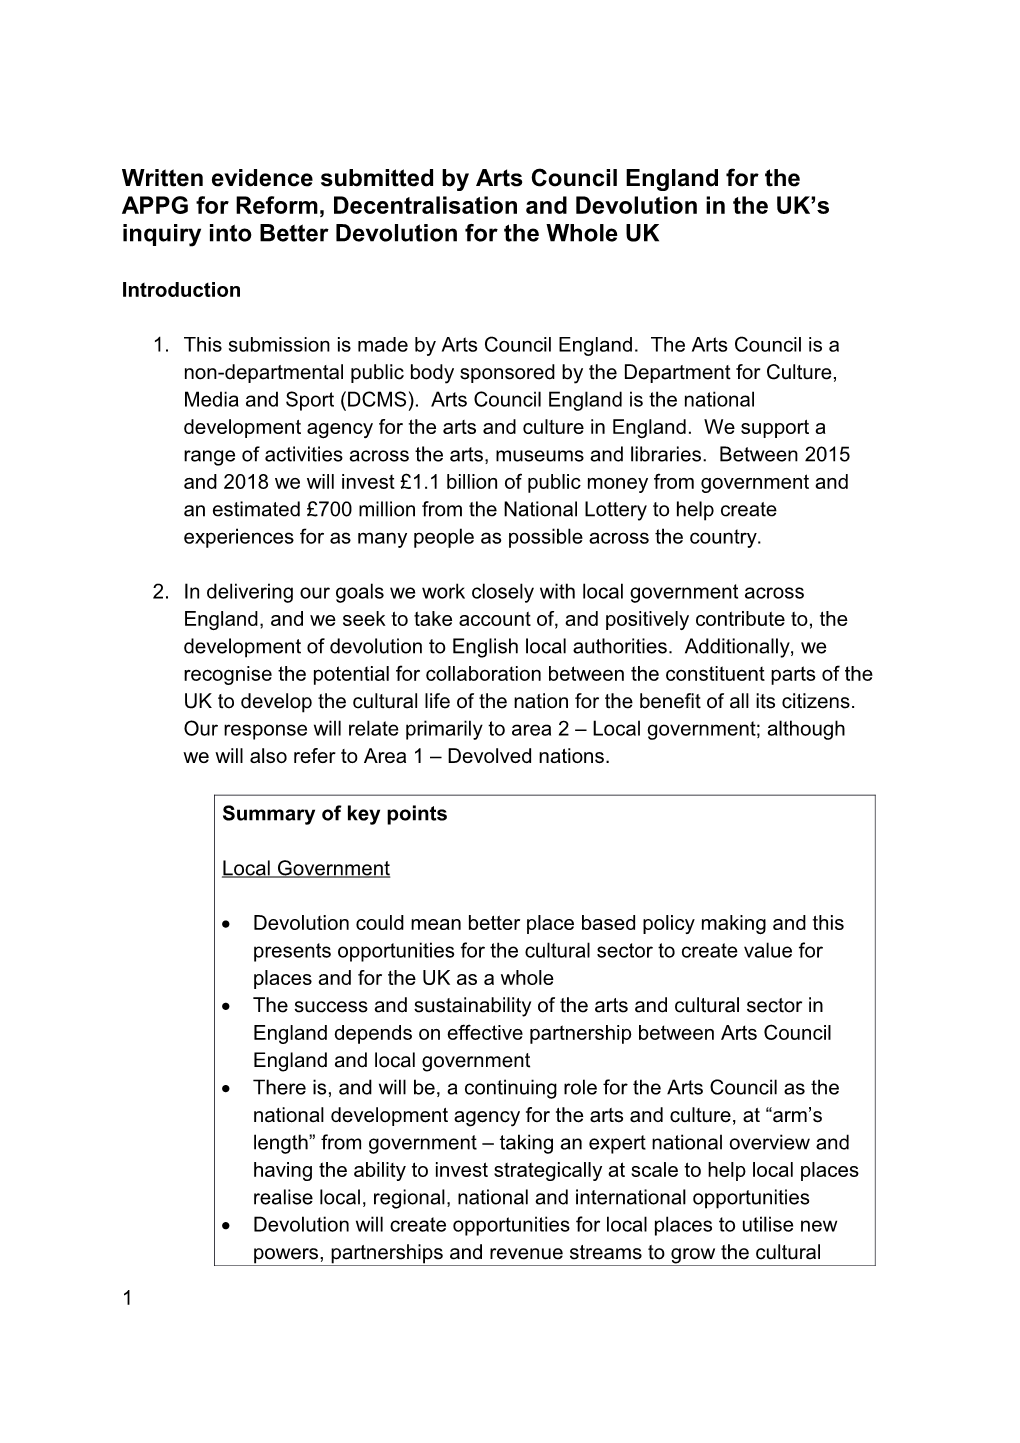 Written Evidence Submitted by Arts Council England for the APPG for Reform, Decentralisation